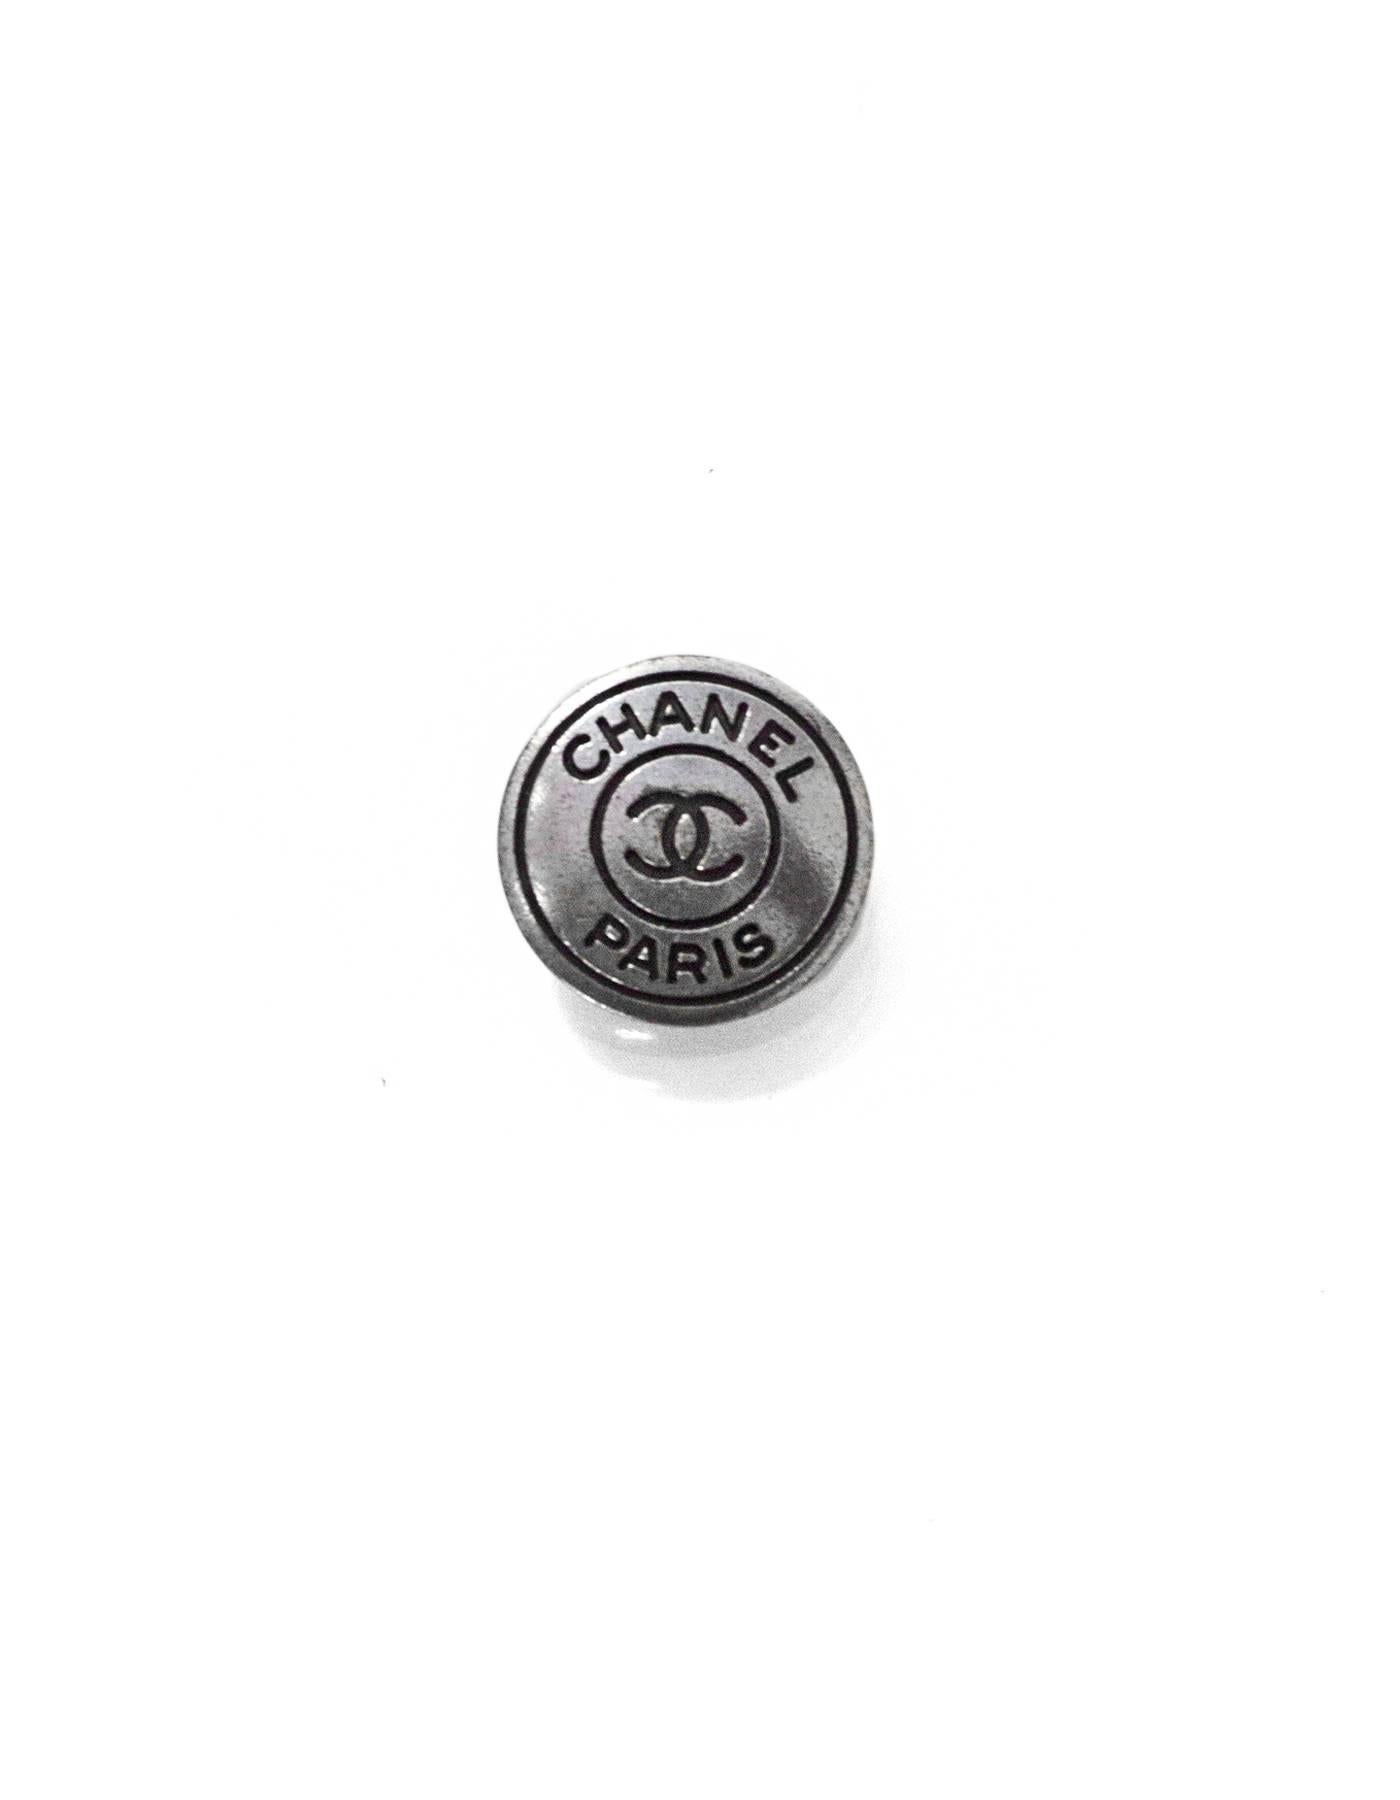 Chanel Antiqued Silver & Black CHANEL PARIS CC Buttons
Features set of two 20mm buttons

Color: Silver, black
Hardware: Silvertone
Materials: Metal
Stamp: CHANEL
Overall Condition: Excellent good pre-owned condition, light surface